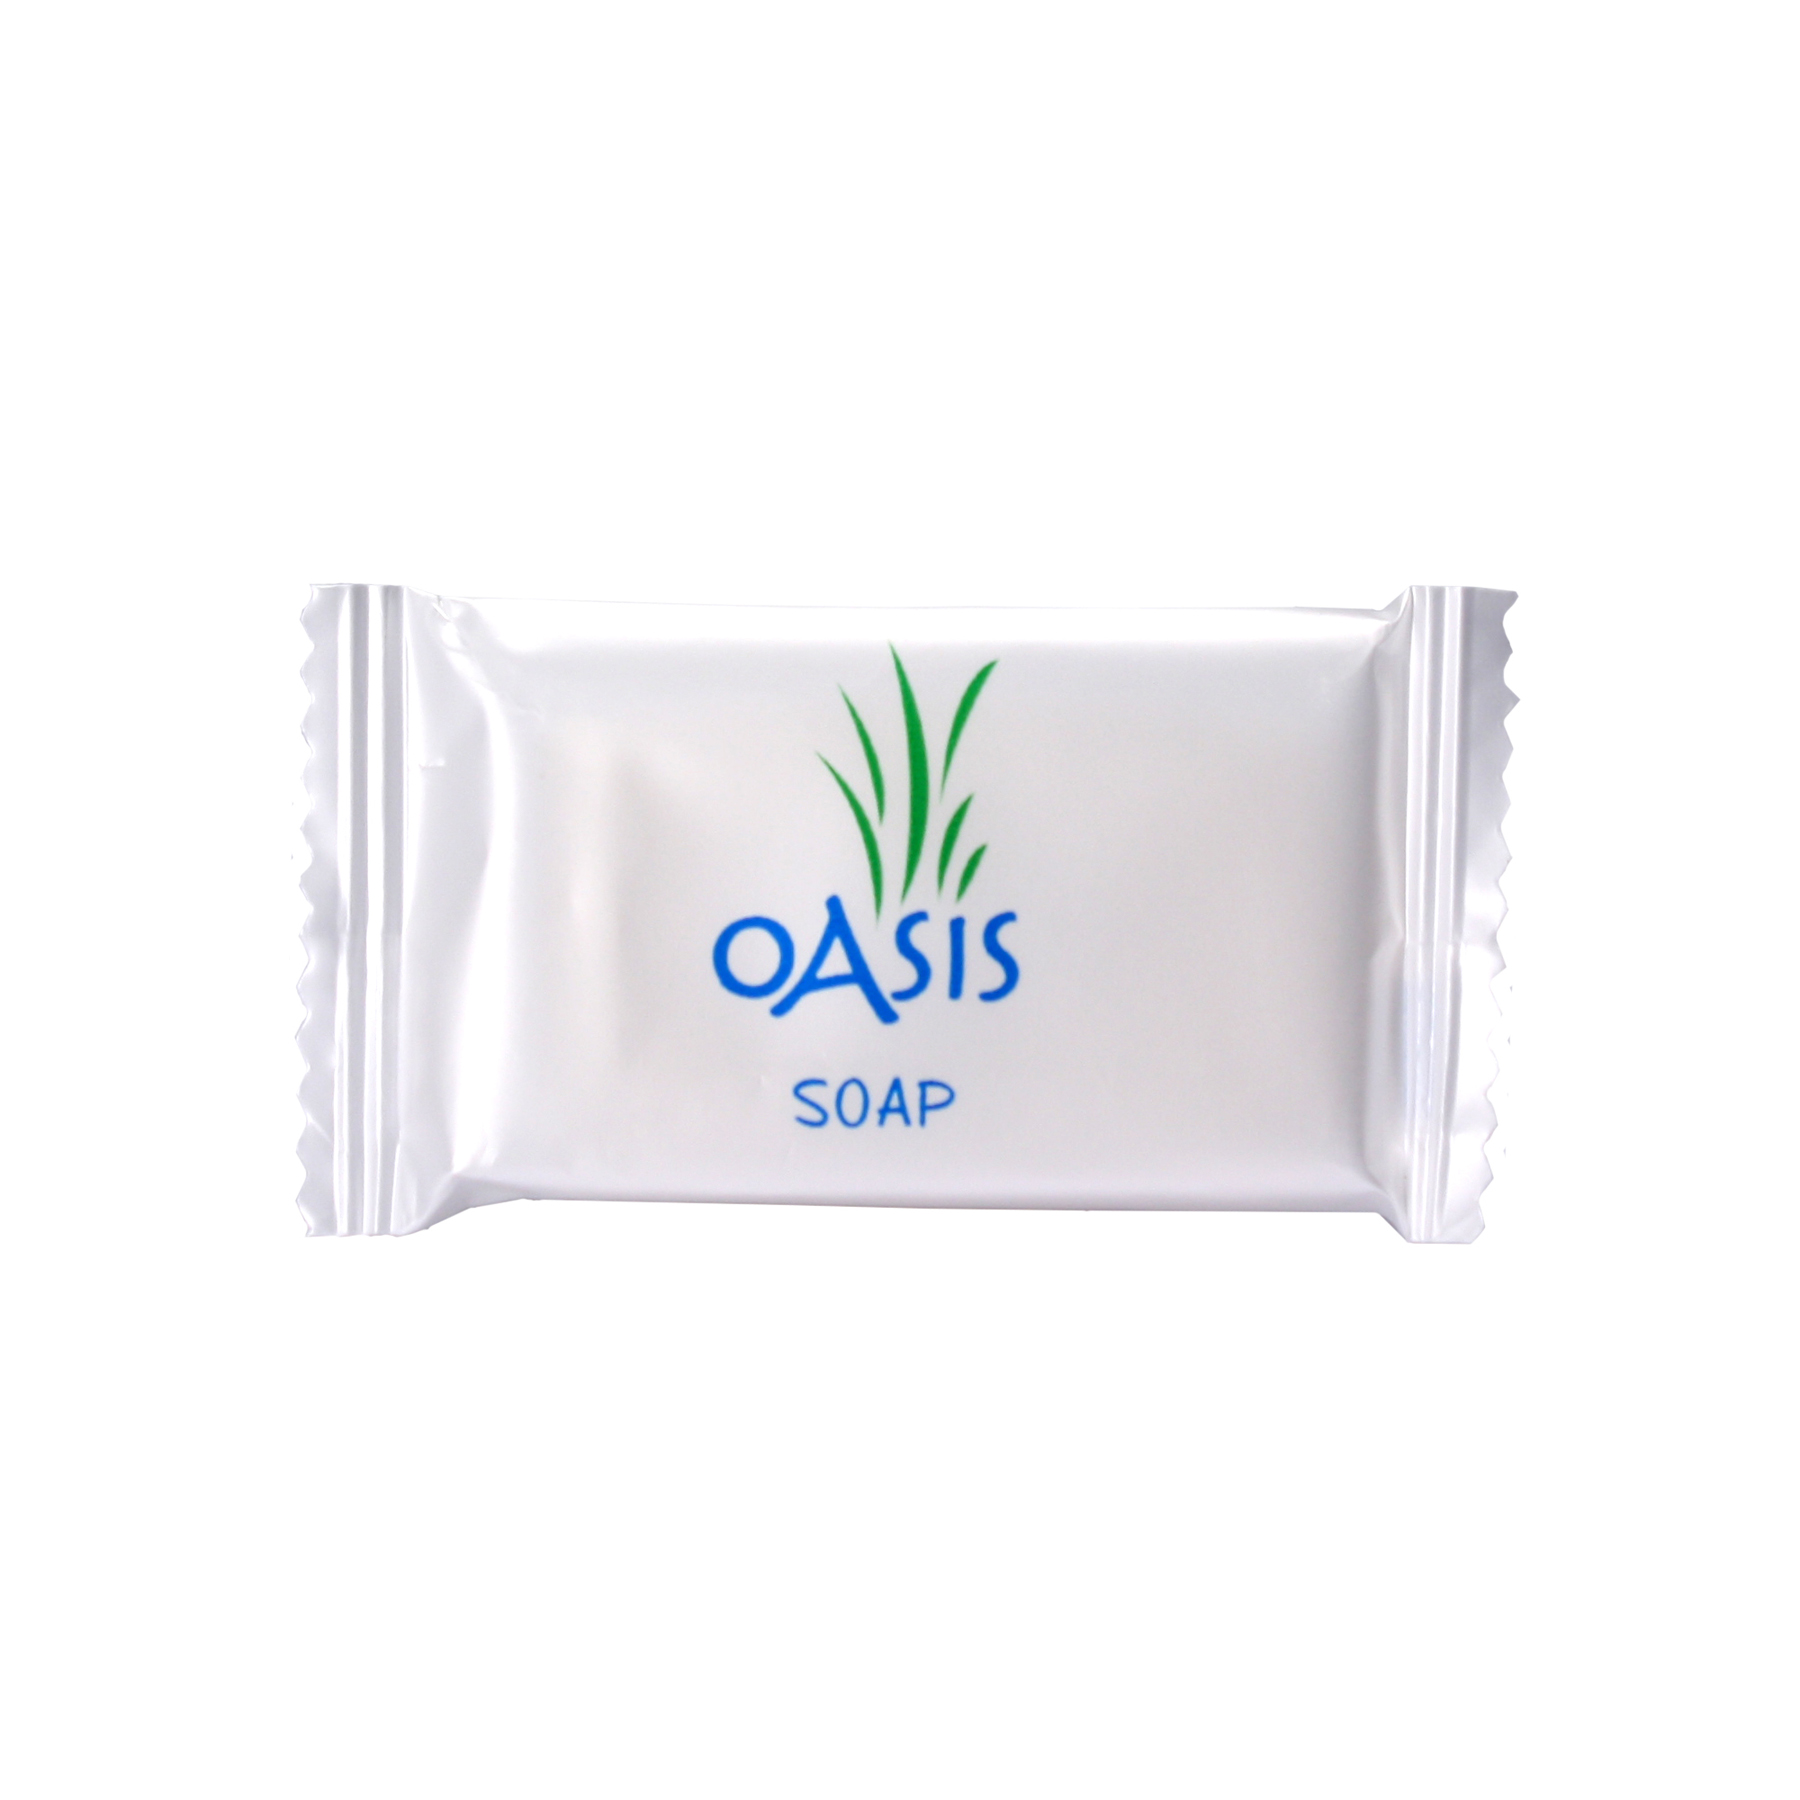 50 BARS OF SOAP BATH & FACE SOAP #1.5 OASIS HOUSEHOLD/HOTEL/TRAVEL SIZE 